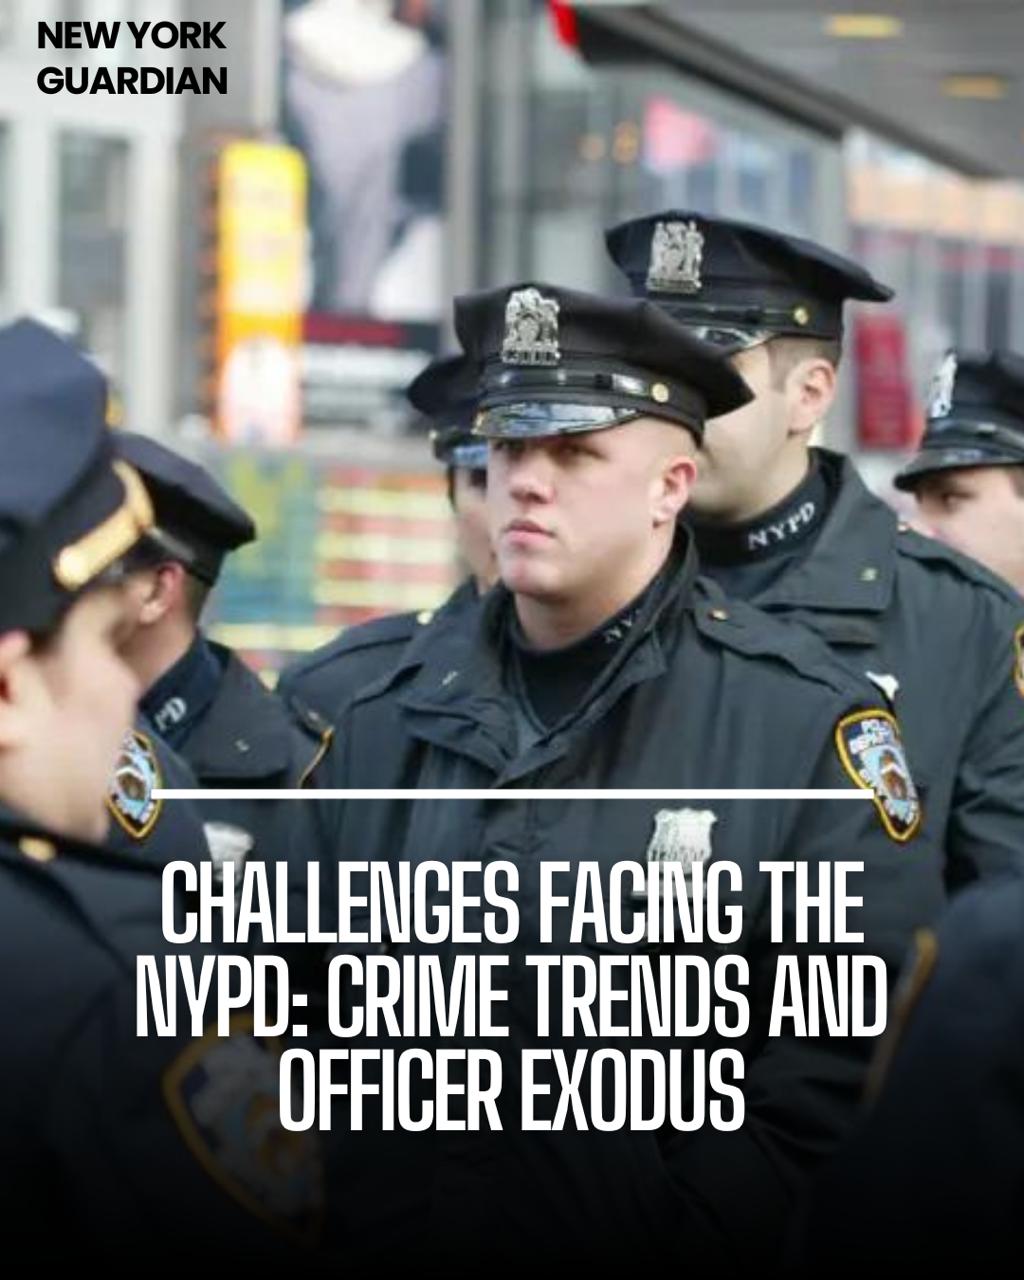 Officials are exiting the NYPD at record rates.